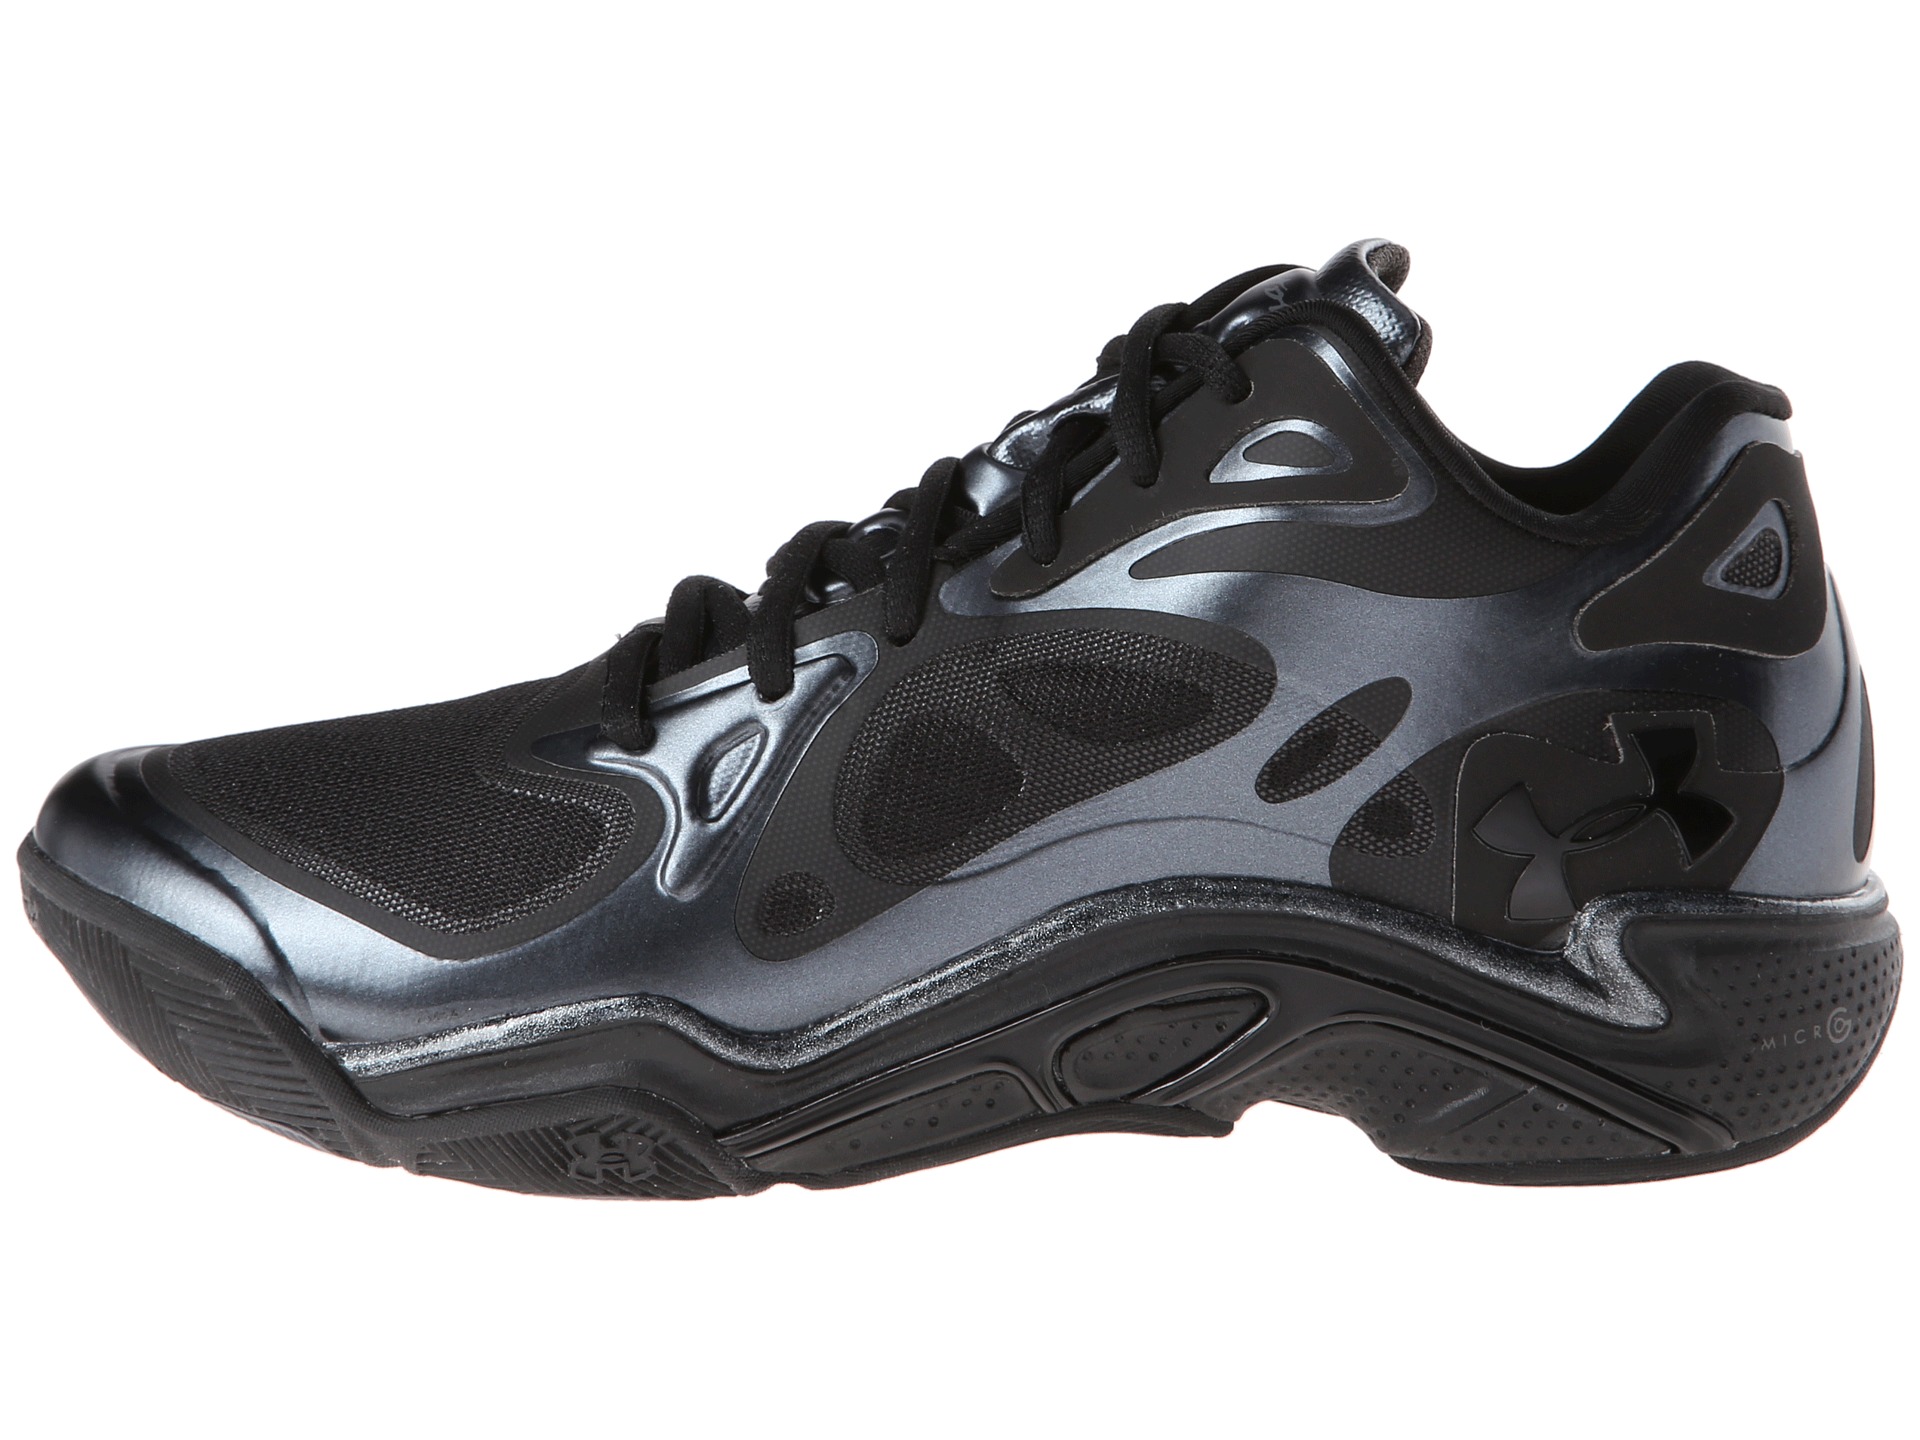 Under Armour Ua Anatomix Spawn Low | Shipped Free at Zappos